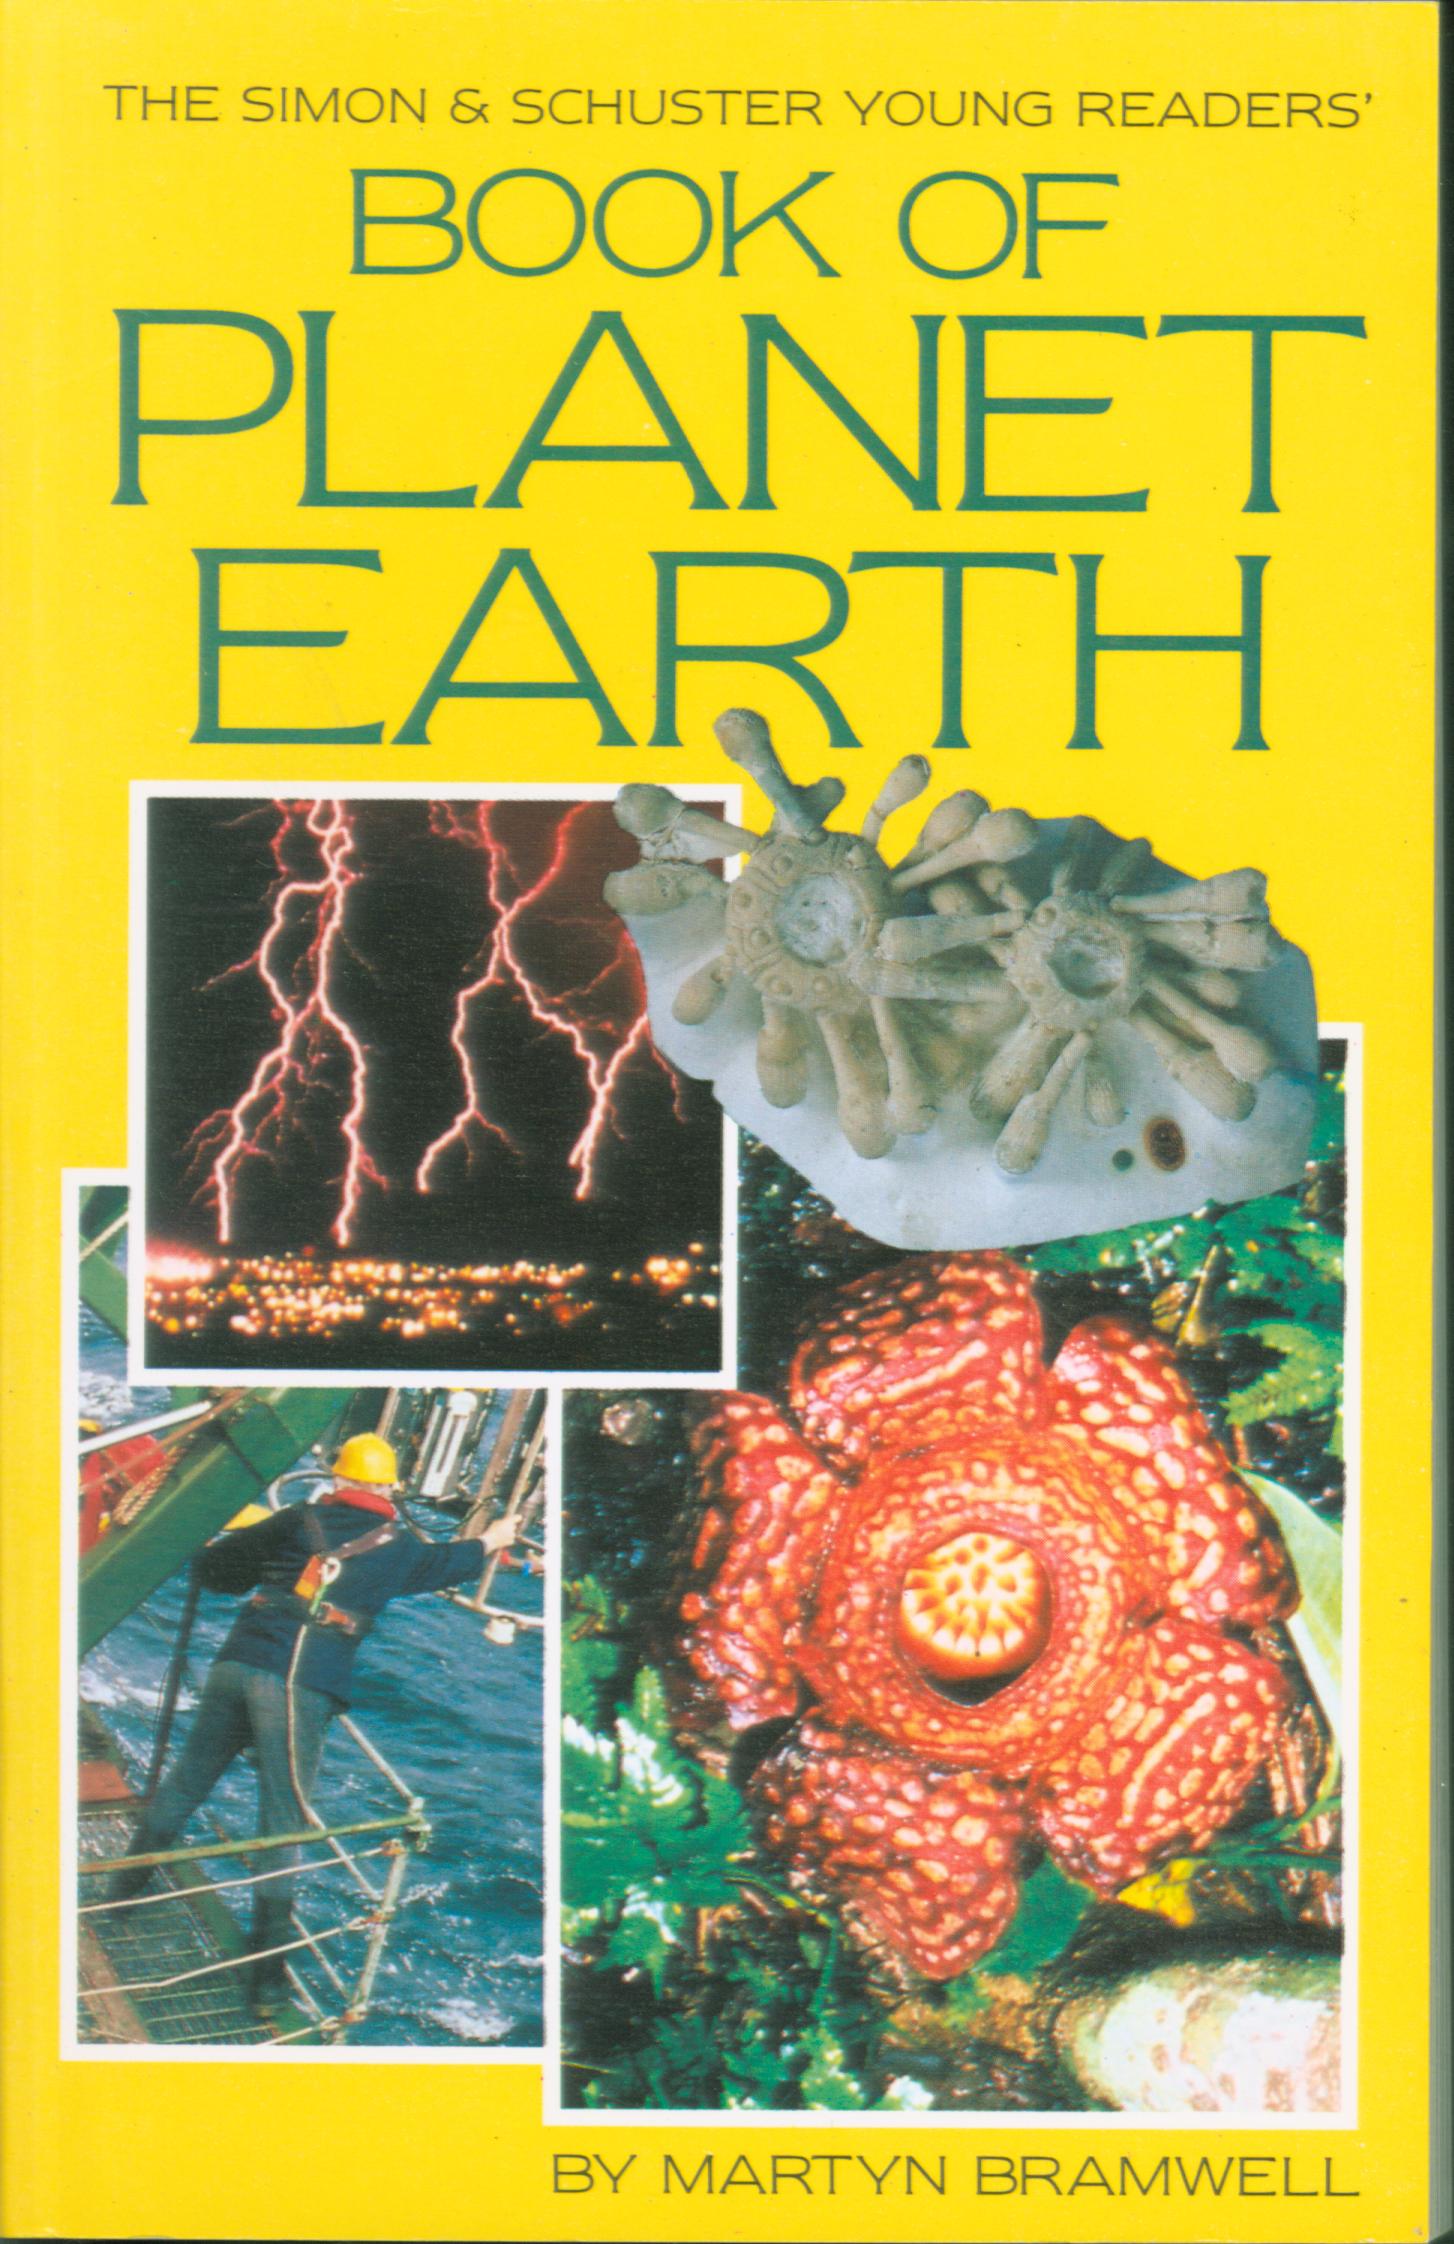 BOOK OF PLANET EARTH (the Simon & Schuster Young Readers').